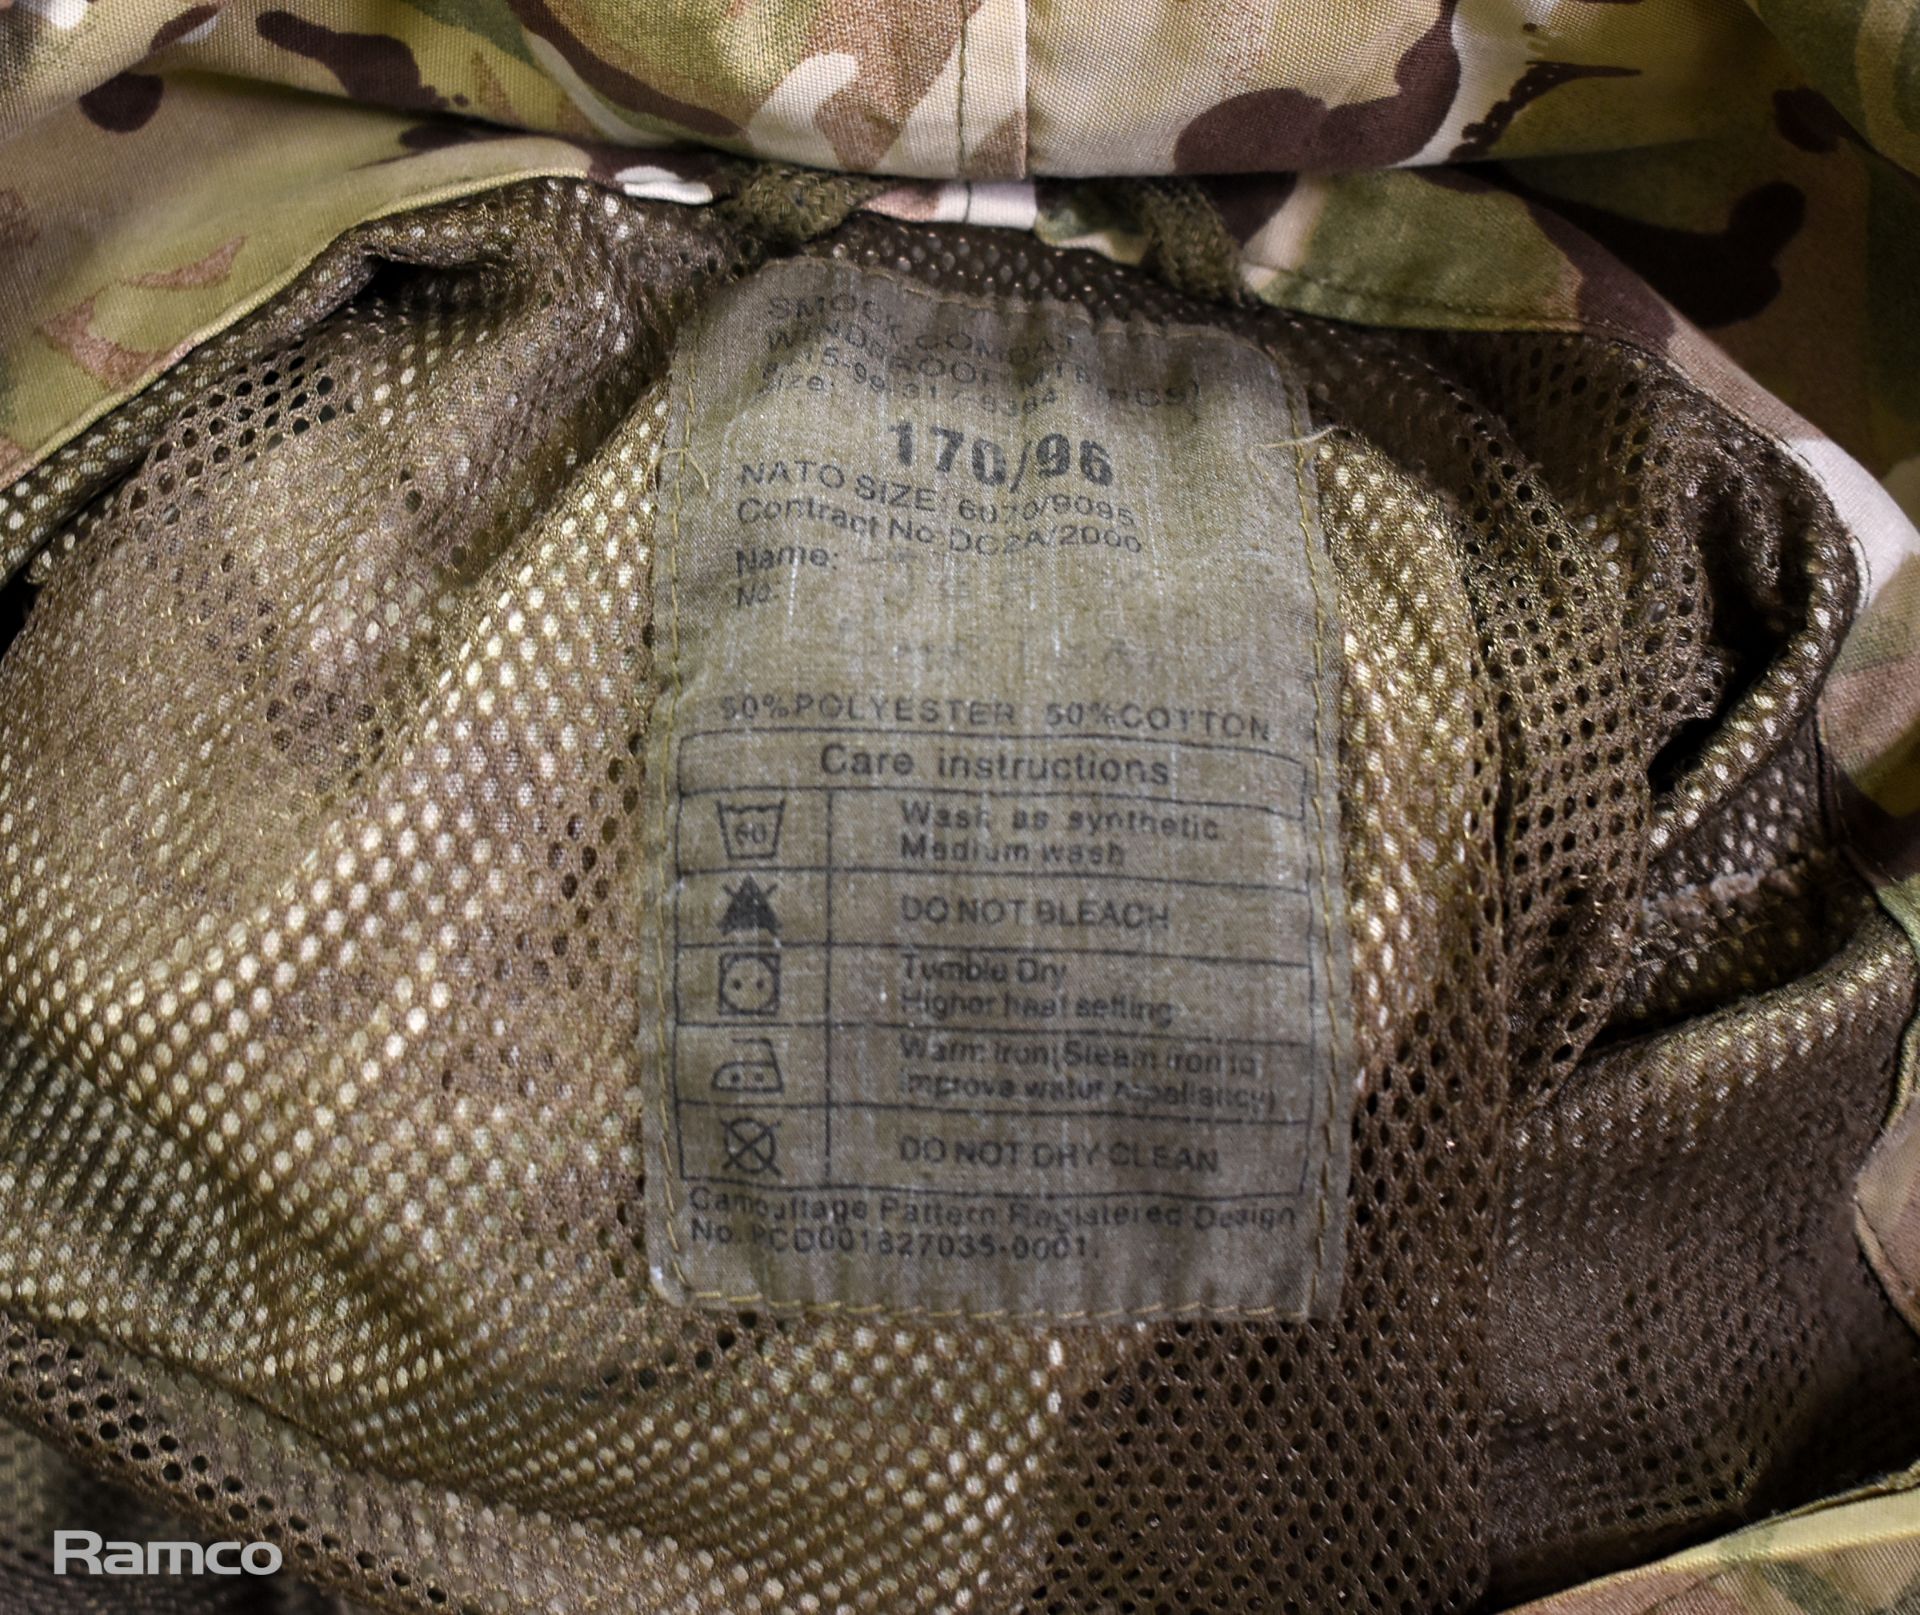 25x British Army MTP windproof smocks - mixed grades and sizes - Image 9 of 9